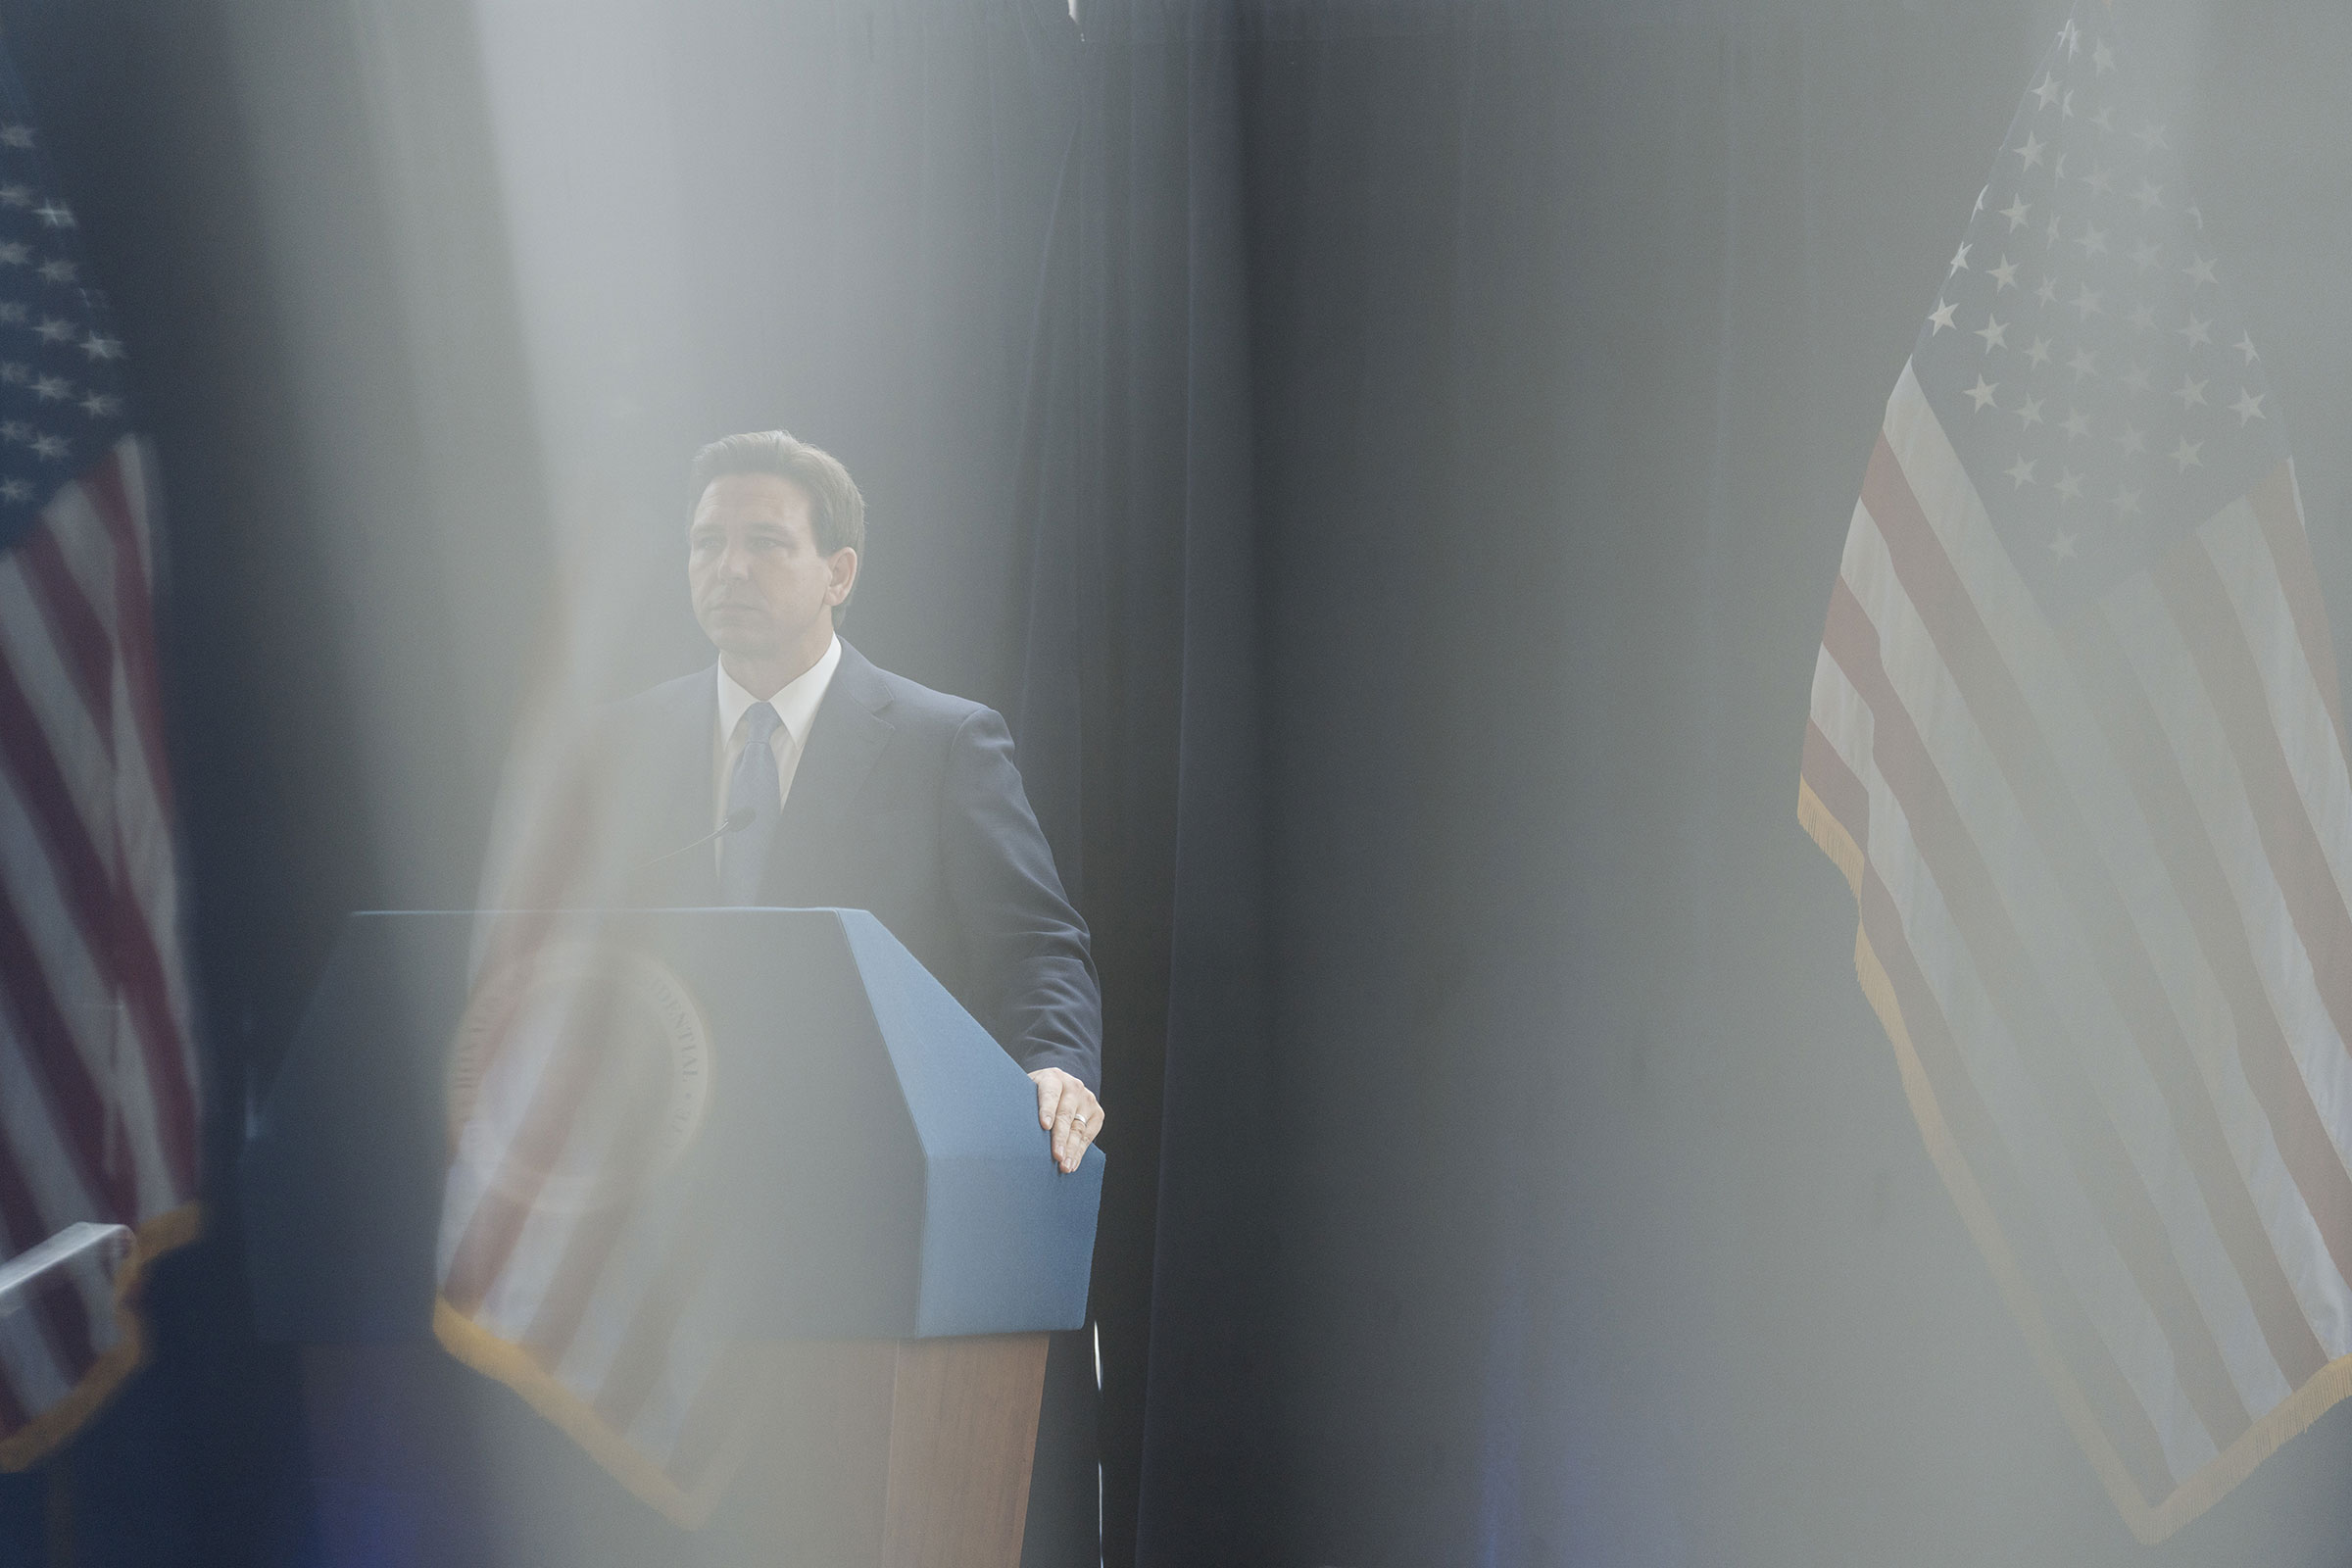 DeSantis speaks during his 'The Courage to Be Free' book tour in Simi Valley, Calif., on March 5 (Eric Thayer—Bloomberg/Getty Images)